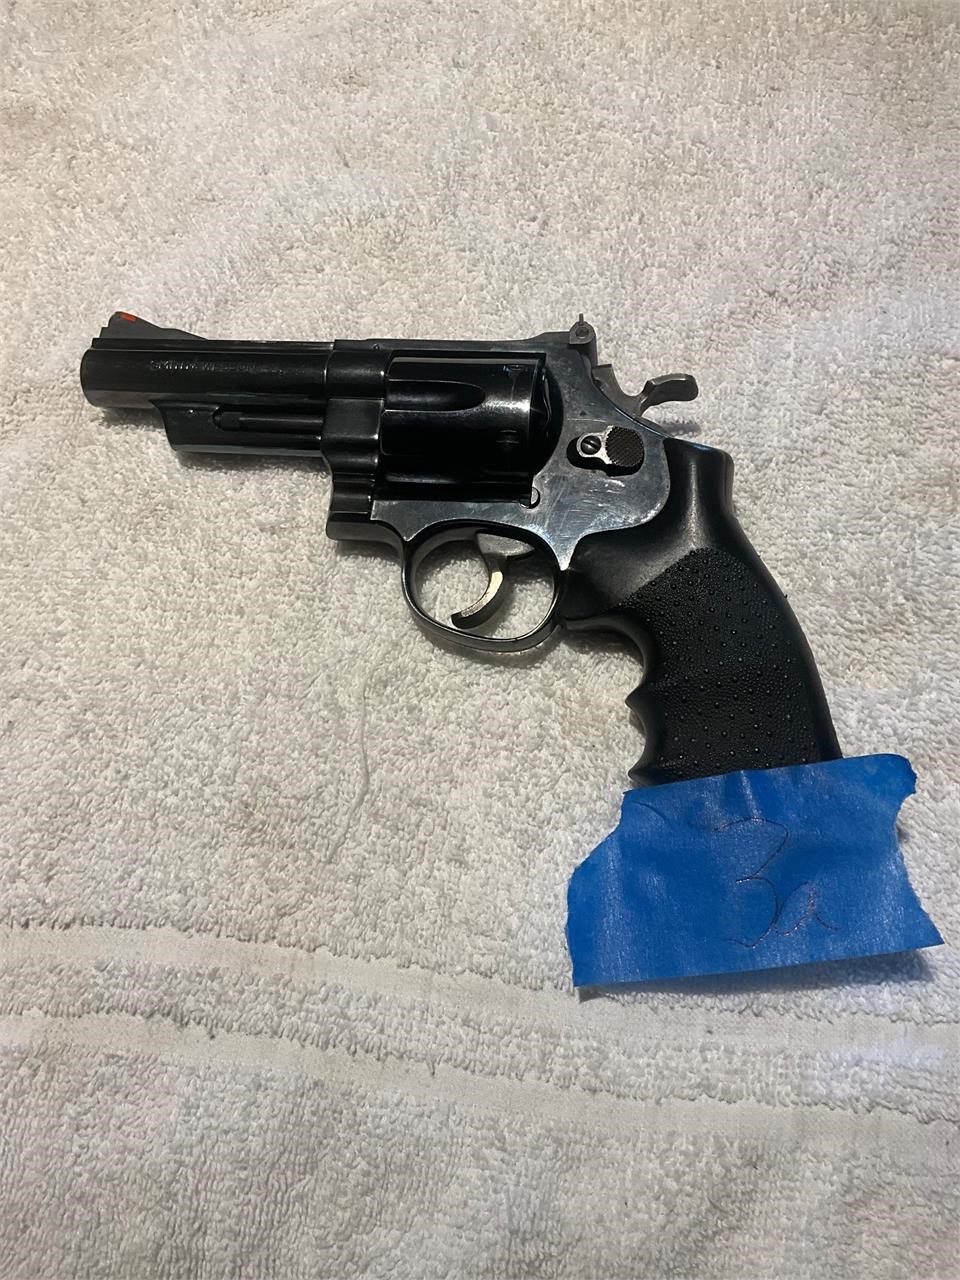 Smith and Wesson 44 mag revolver